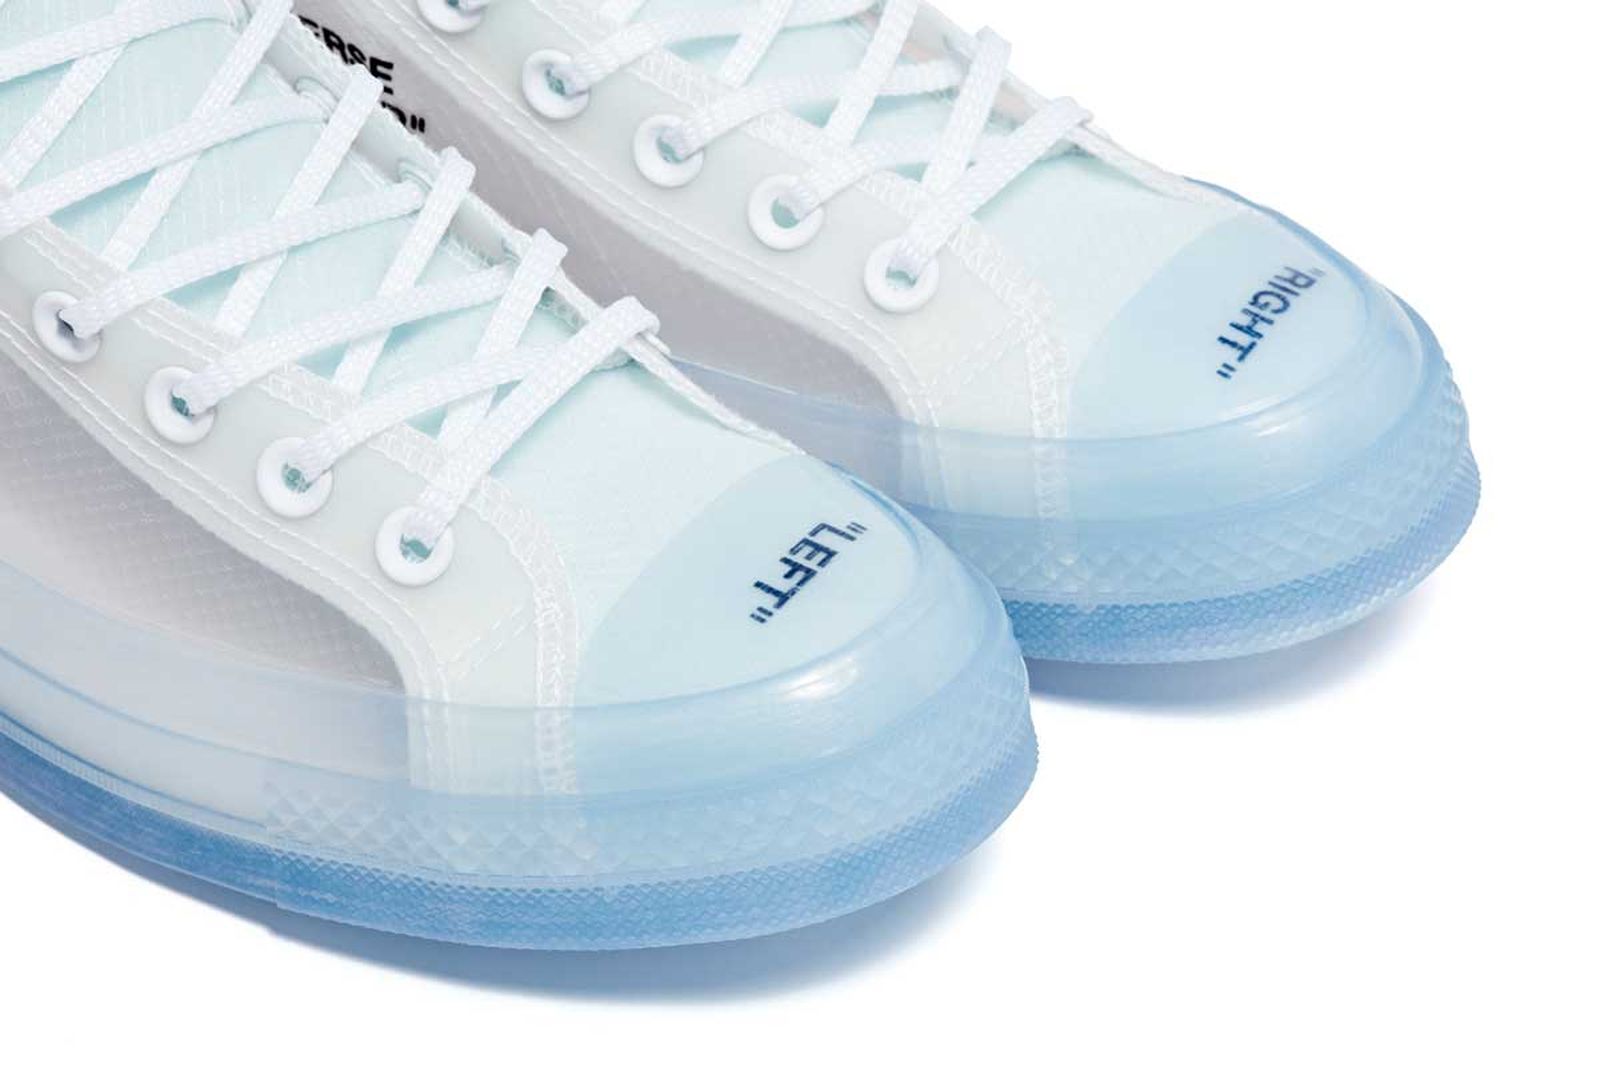 Bunke af Larry Belmont lighed OFF-WHITE x Converse Chuck Taylor: Release Date, Price & More